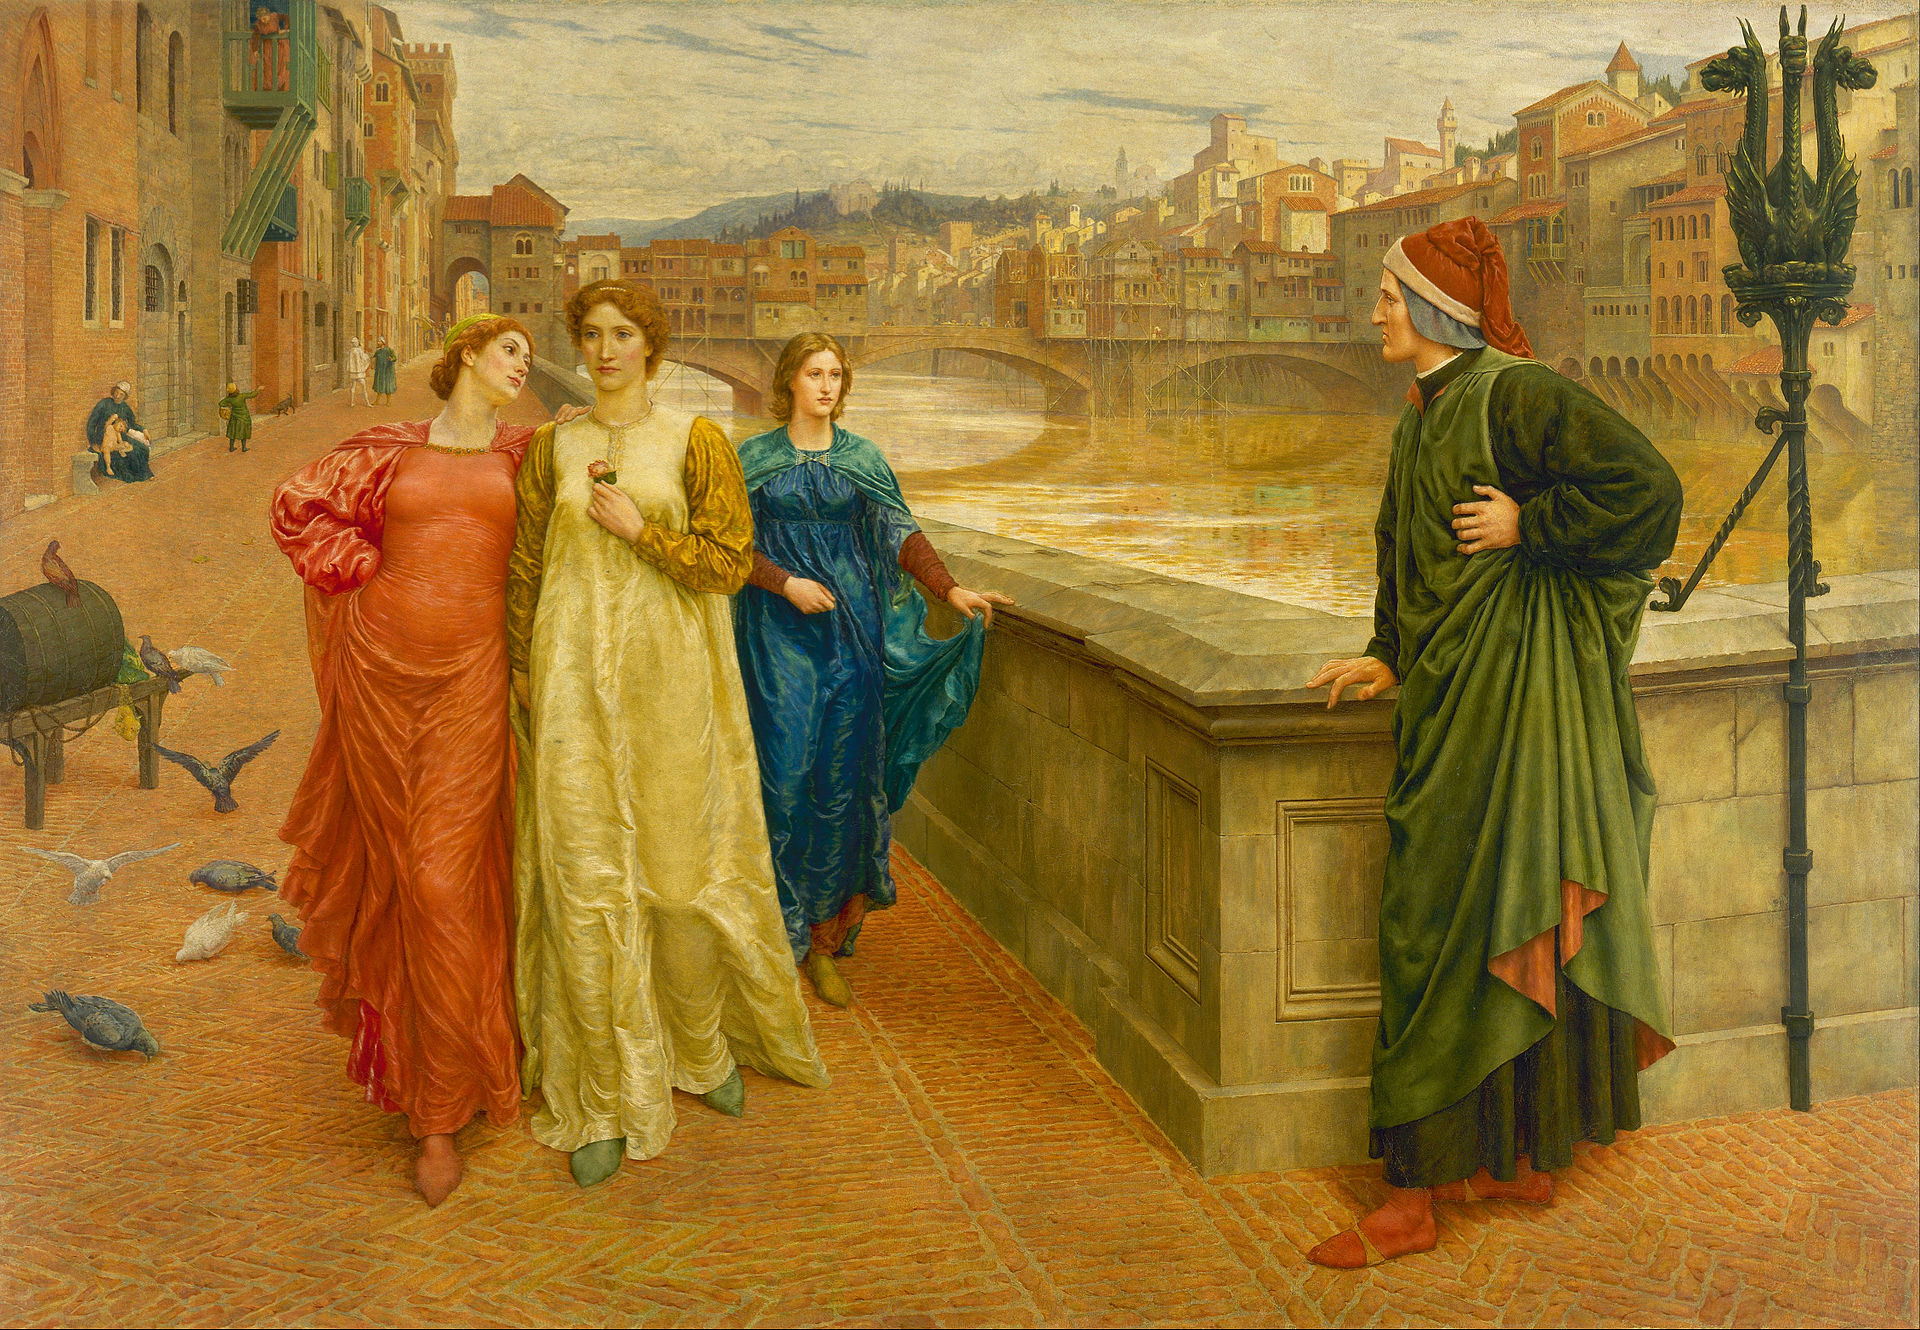 Dante és Beatrice by Henry Holiday - 1882/1884 - 142.2 × 203,2 cm 